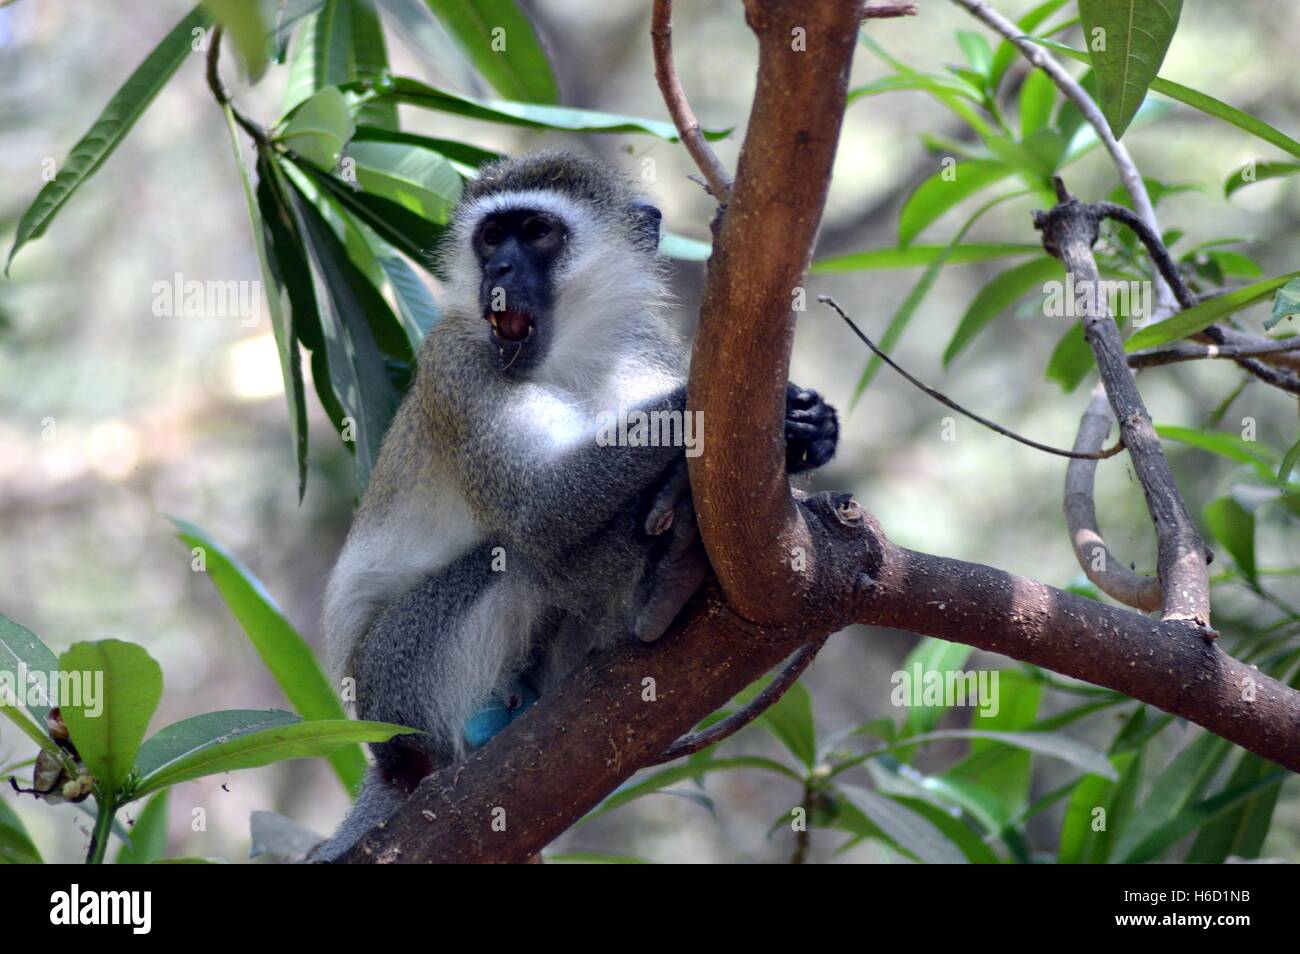 A gray and black color on a tree monkey in Tanzania Stock Photo